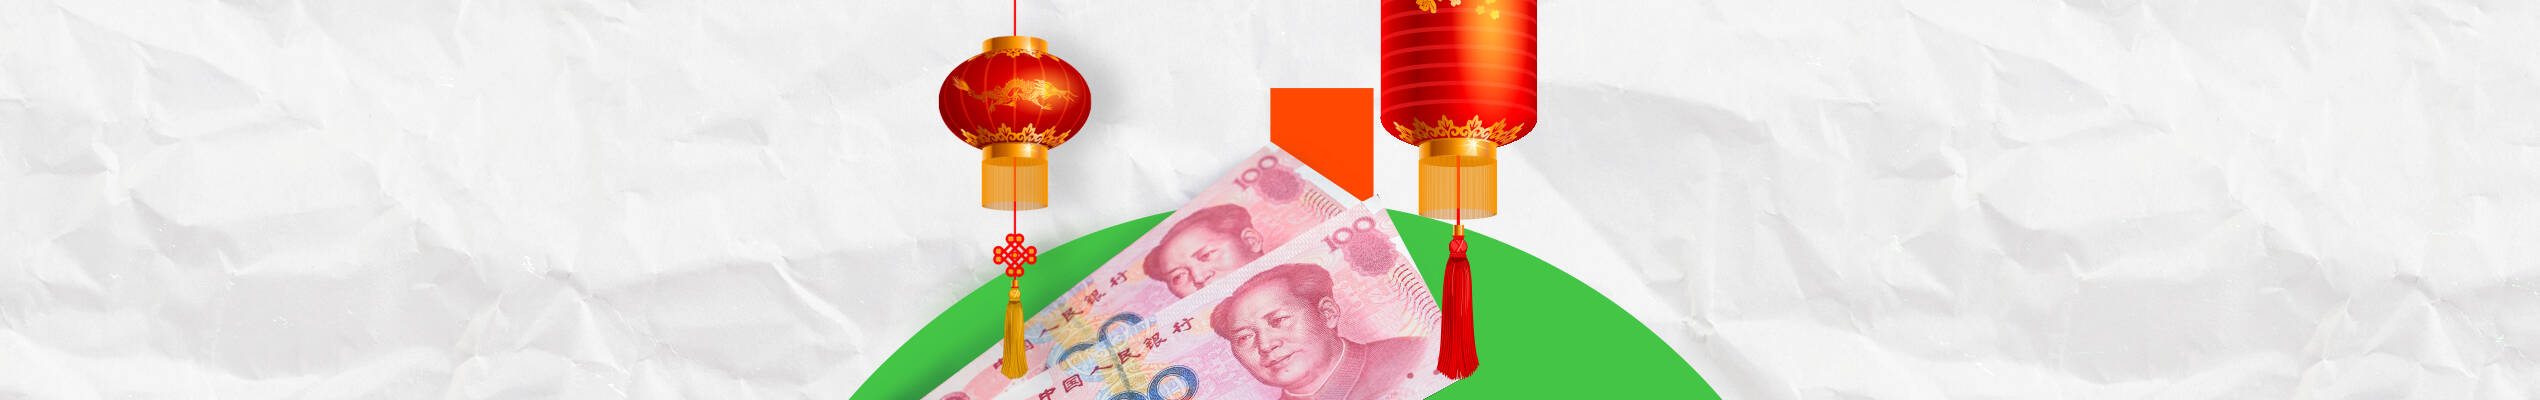 Chinese yuan dropped after dire inflation data